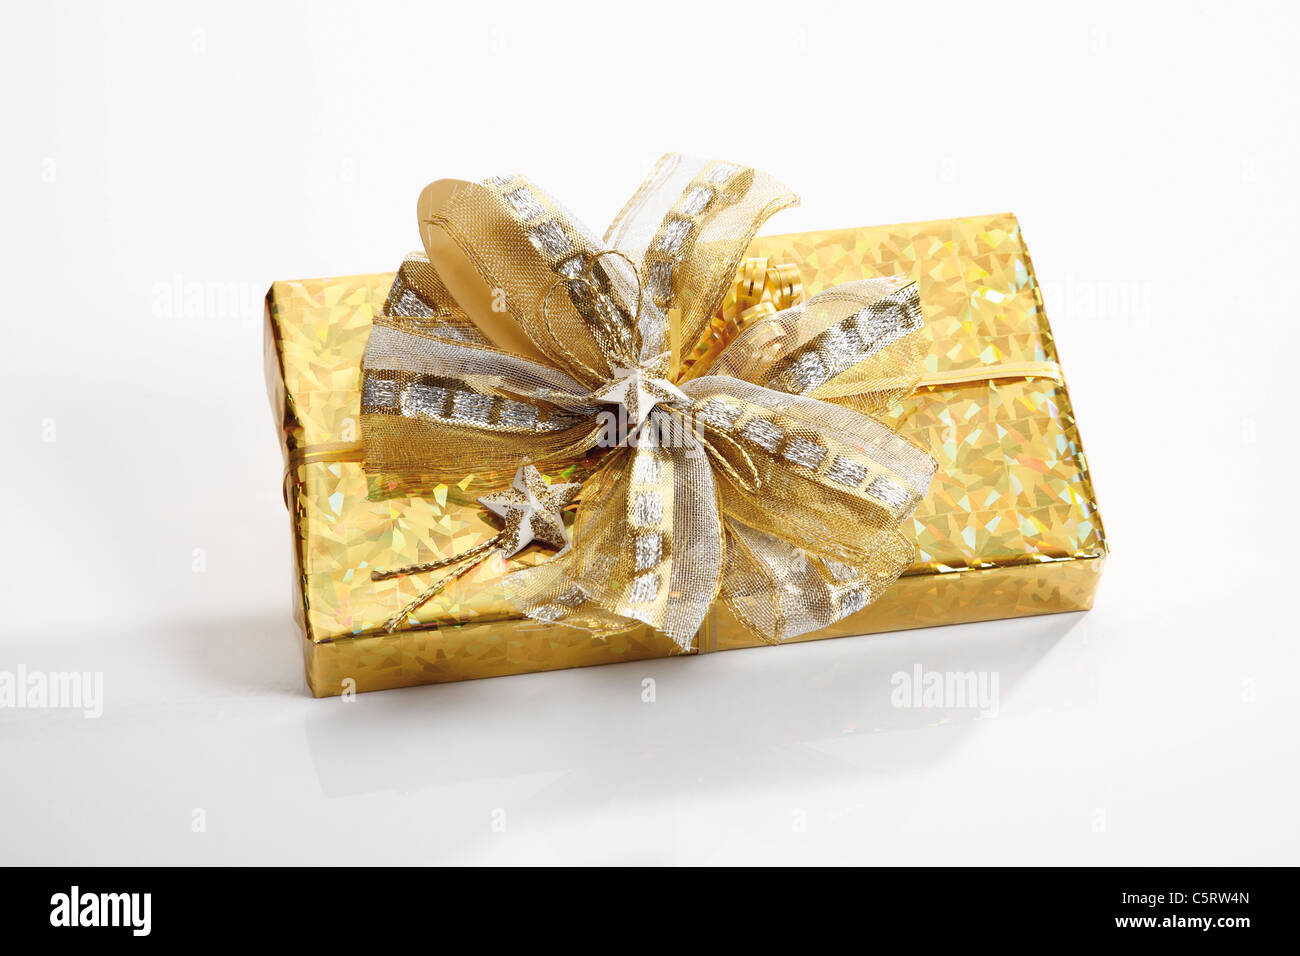 Christmas gift parcel, elevated view Stock Photo